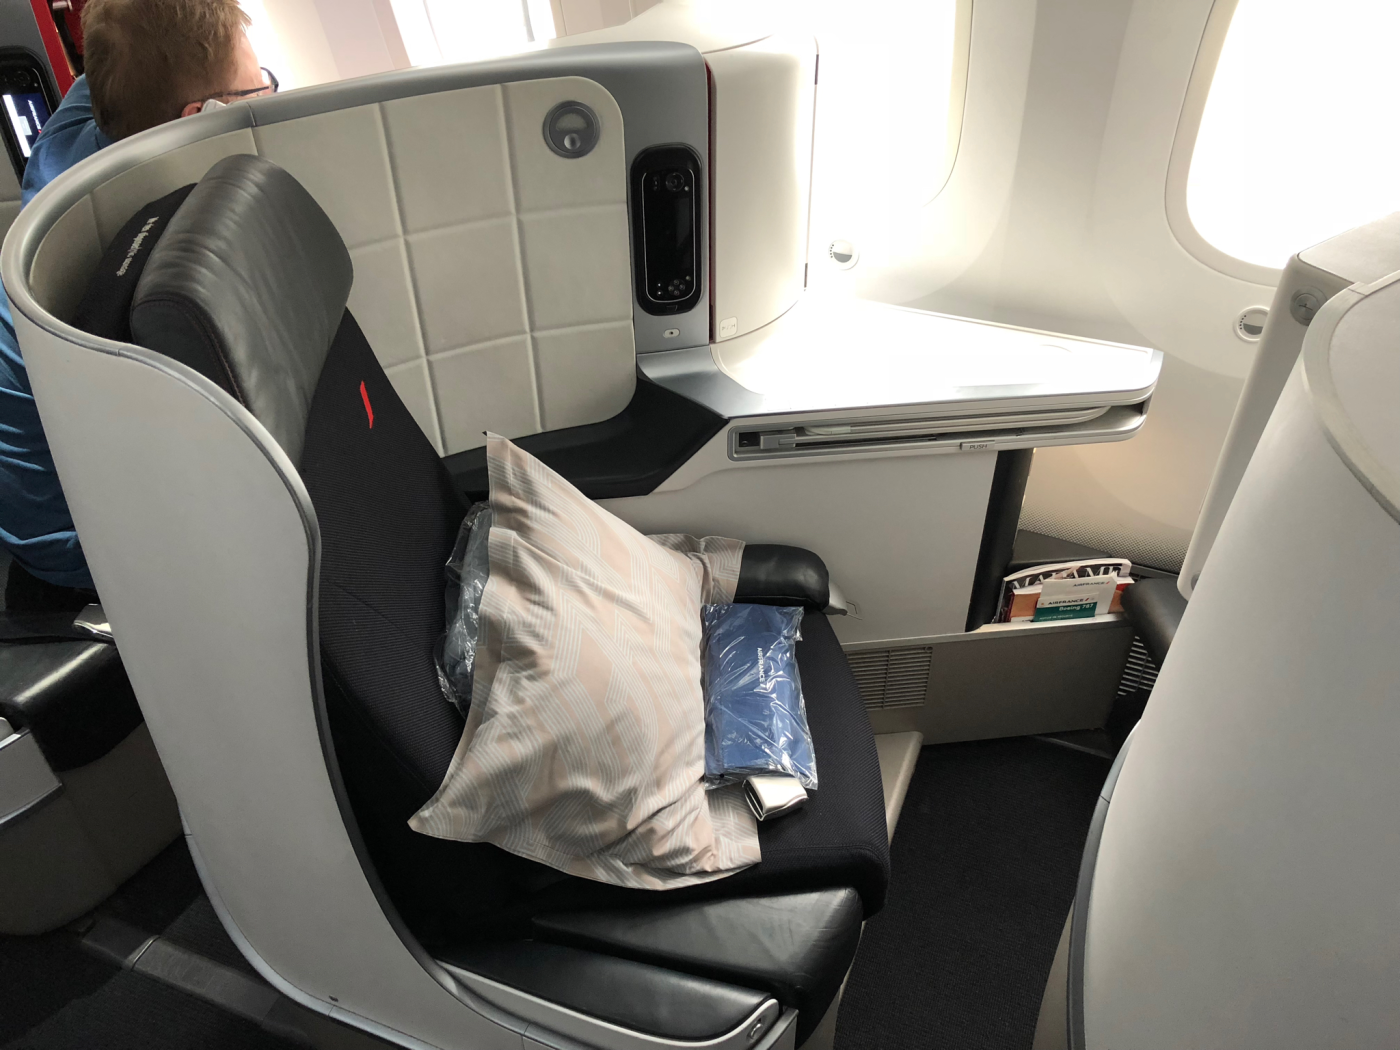 Air France Unveils New Fully Flat Business-Class Seats With Sliding Doors